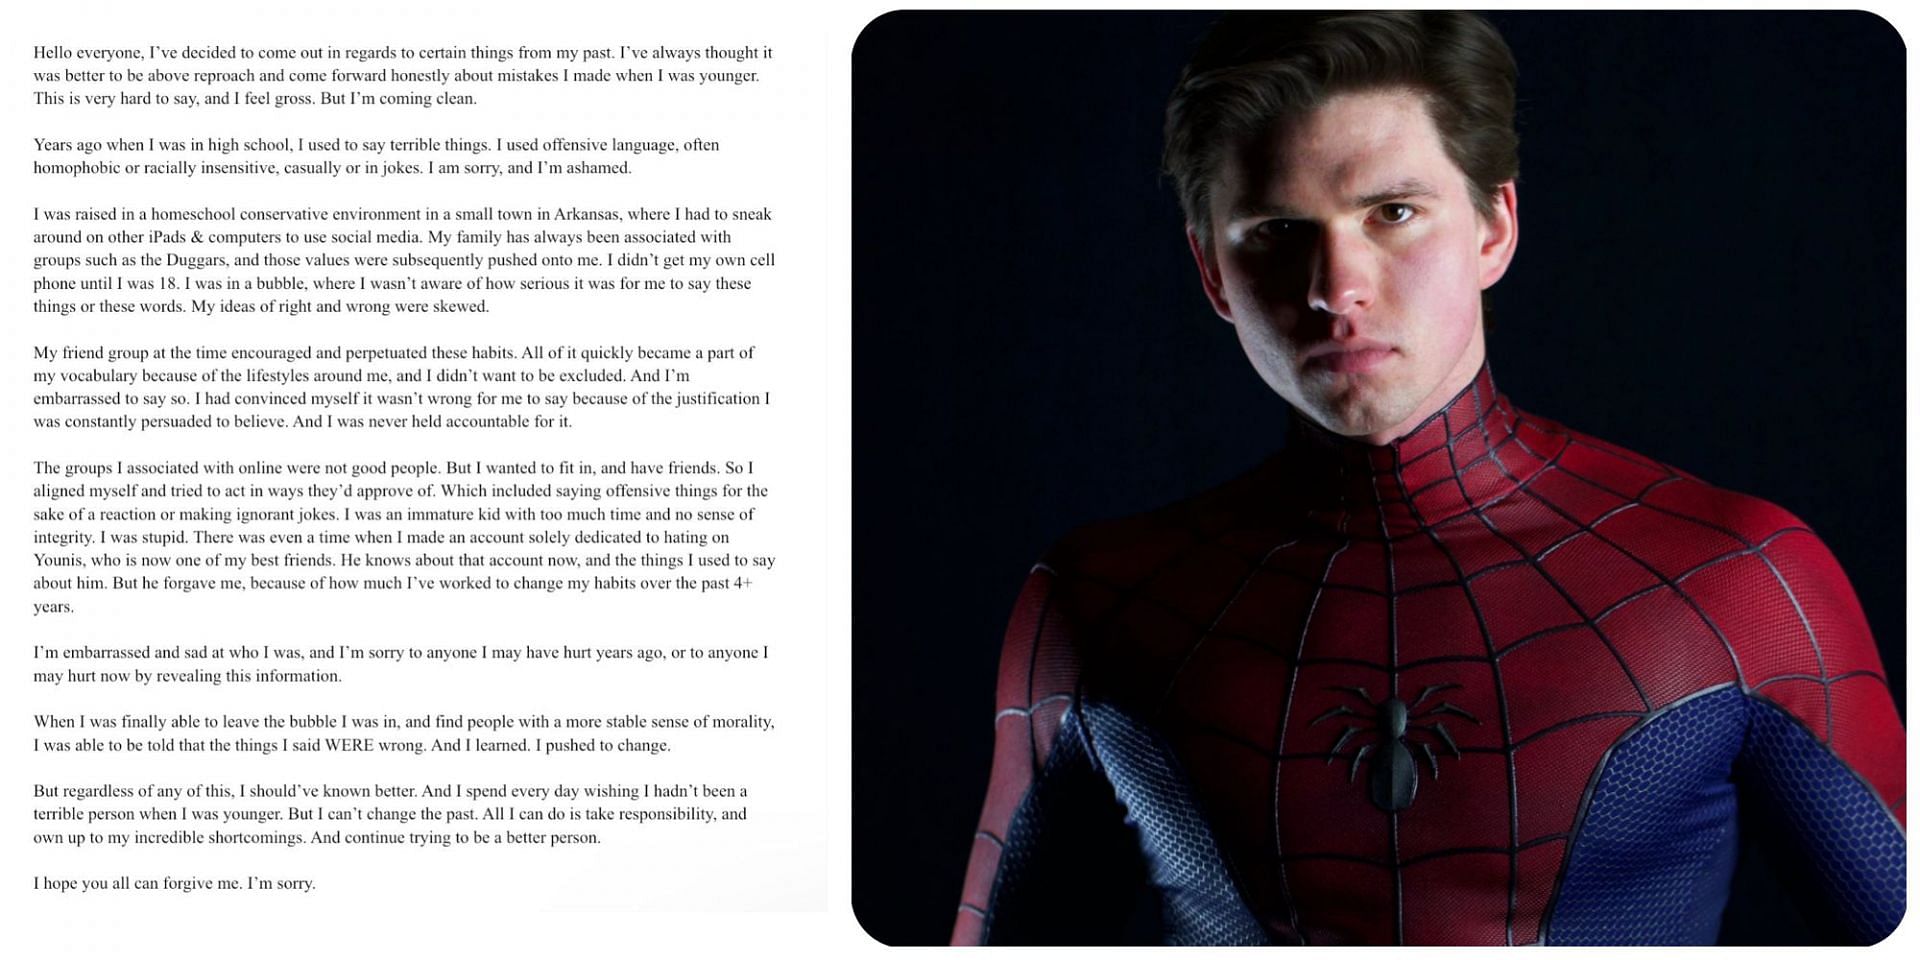 Spider Man actor Warden Wayne issued a public apology for comments he made as a teenager. (Image via @mrwardenwayne/Twitter)